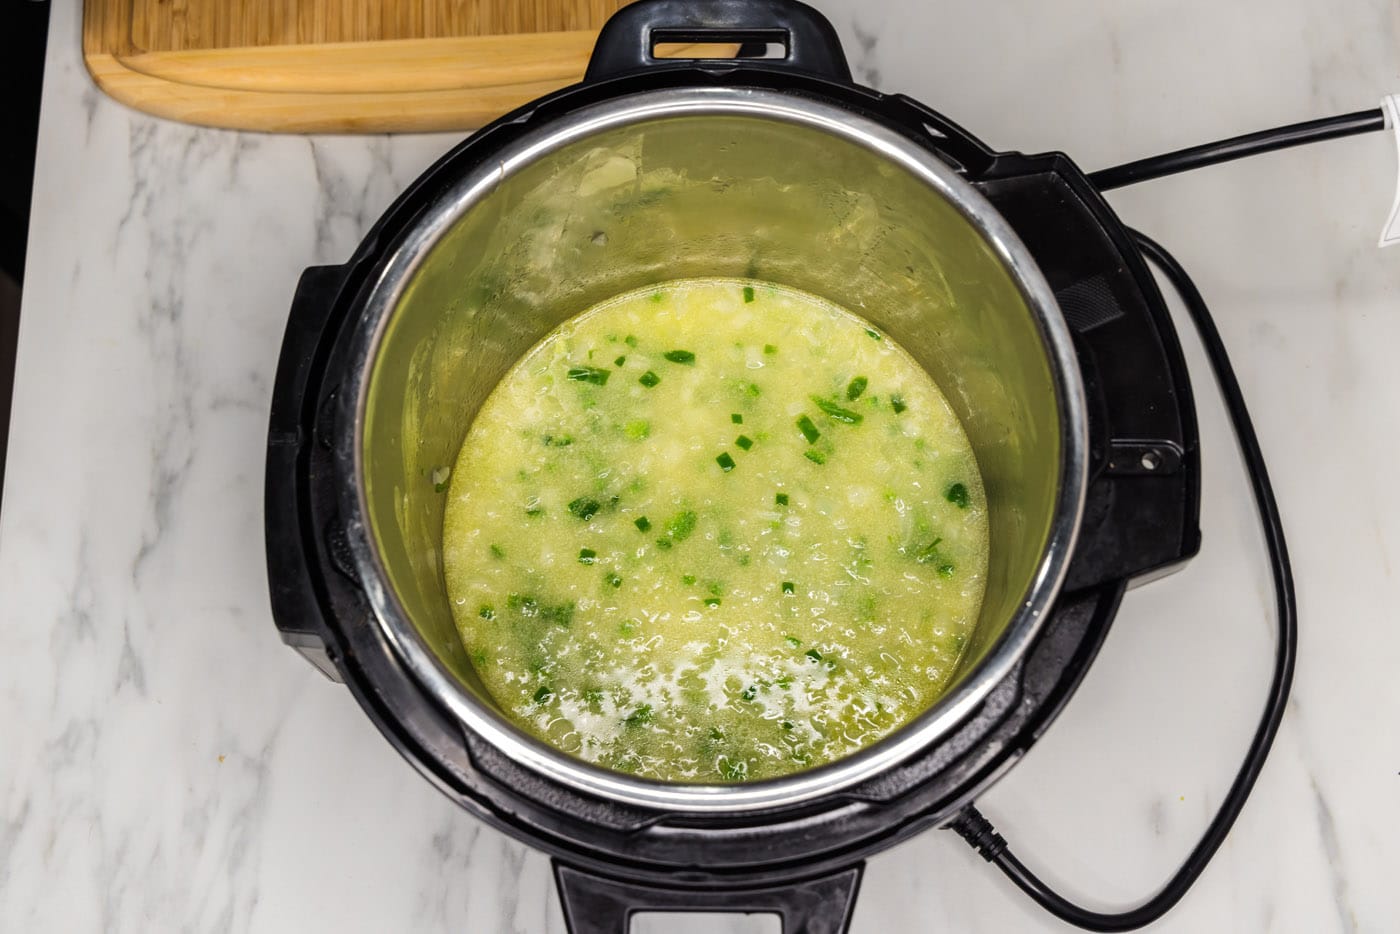 water, chicken base, and vegetables in pressure cooker